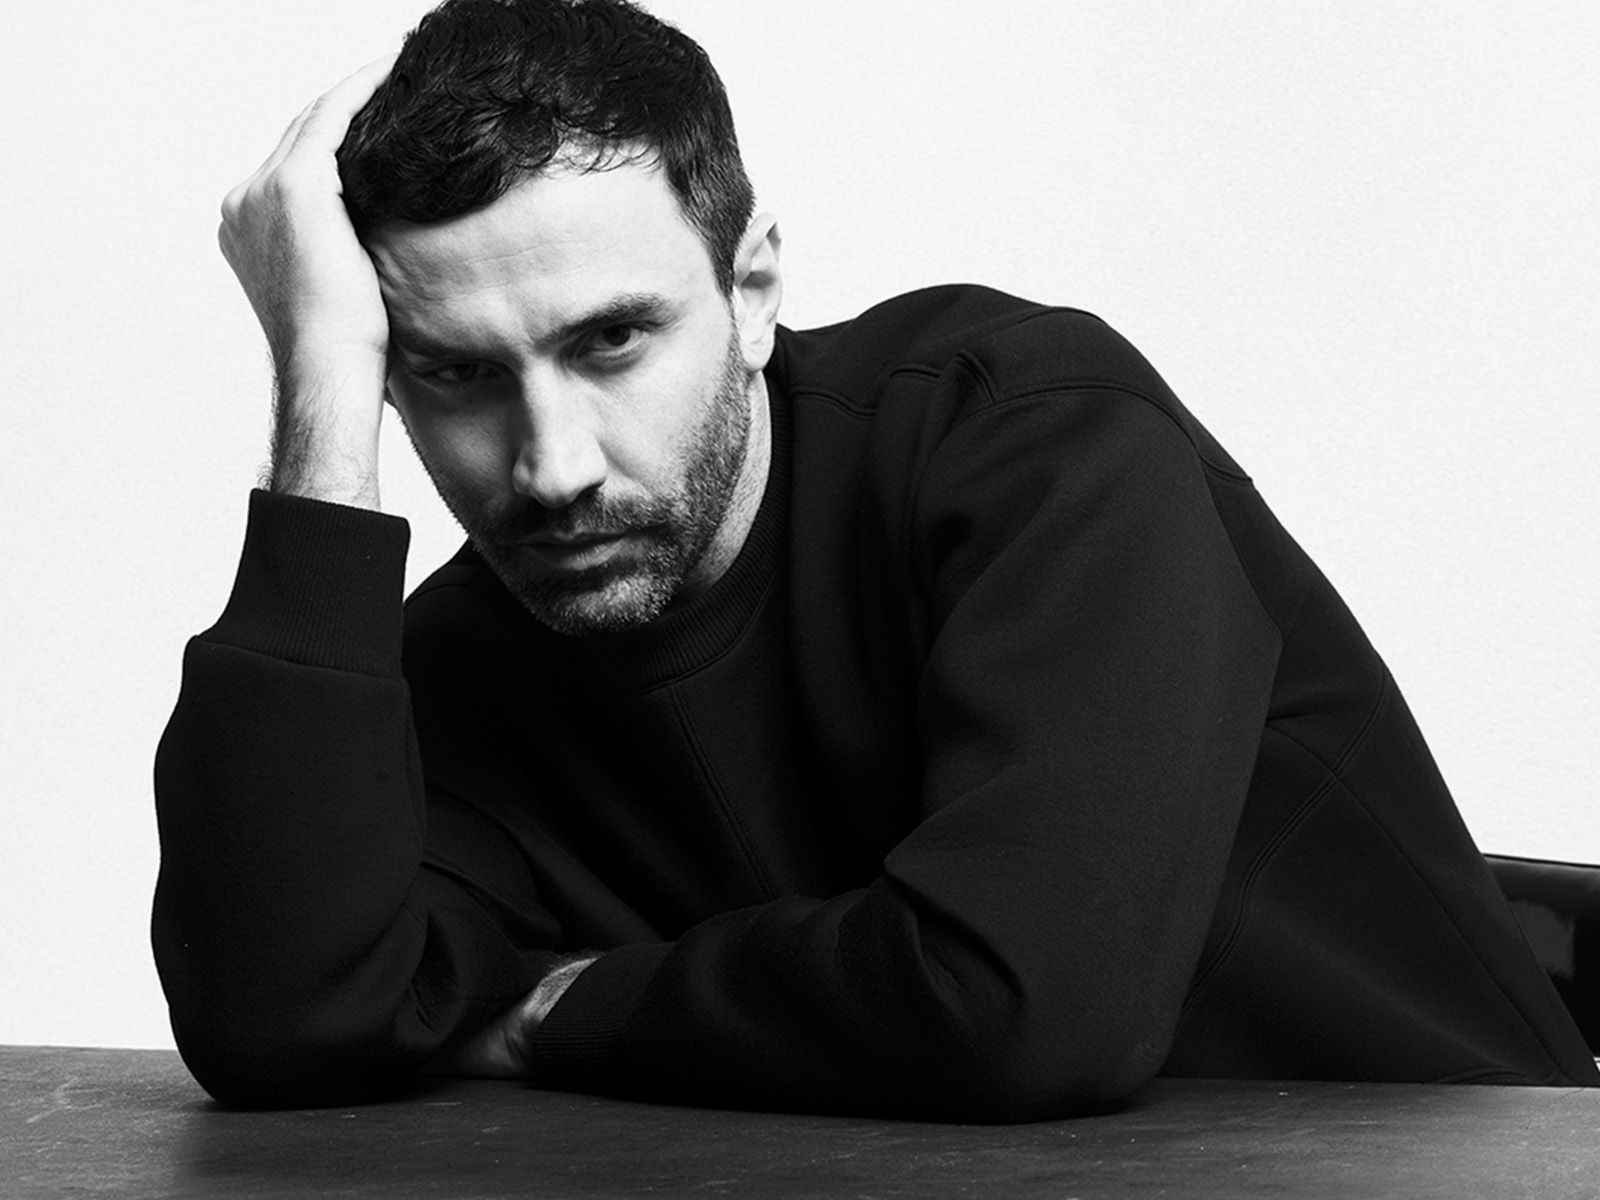 What will happen to Riccardo Tisci after his departure from Burberry?